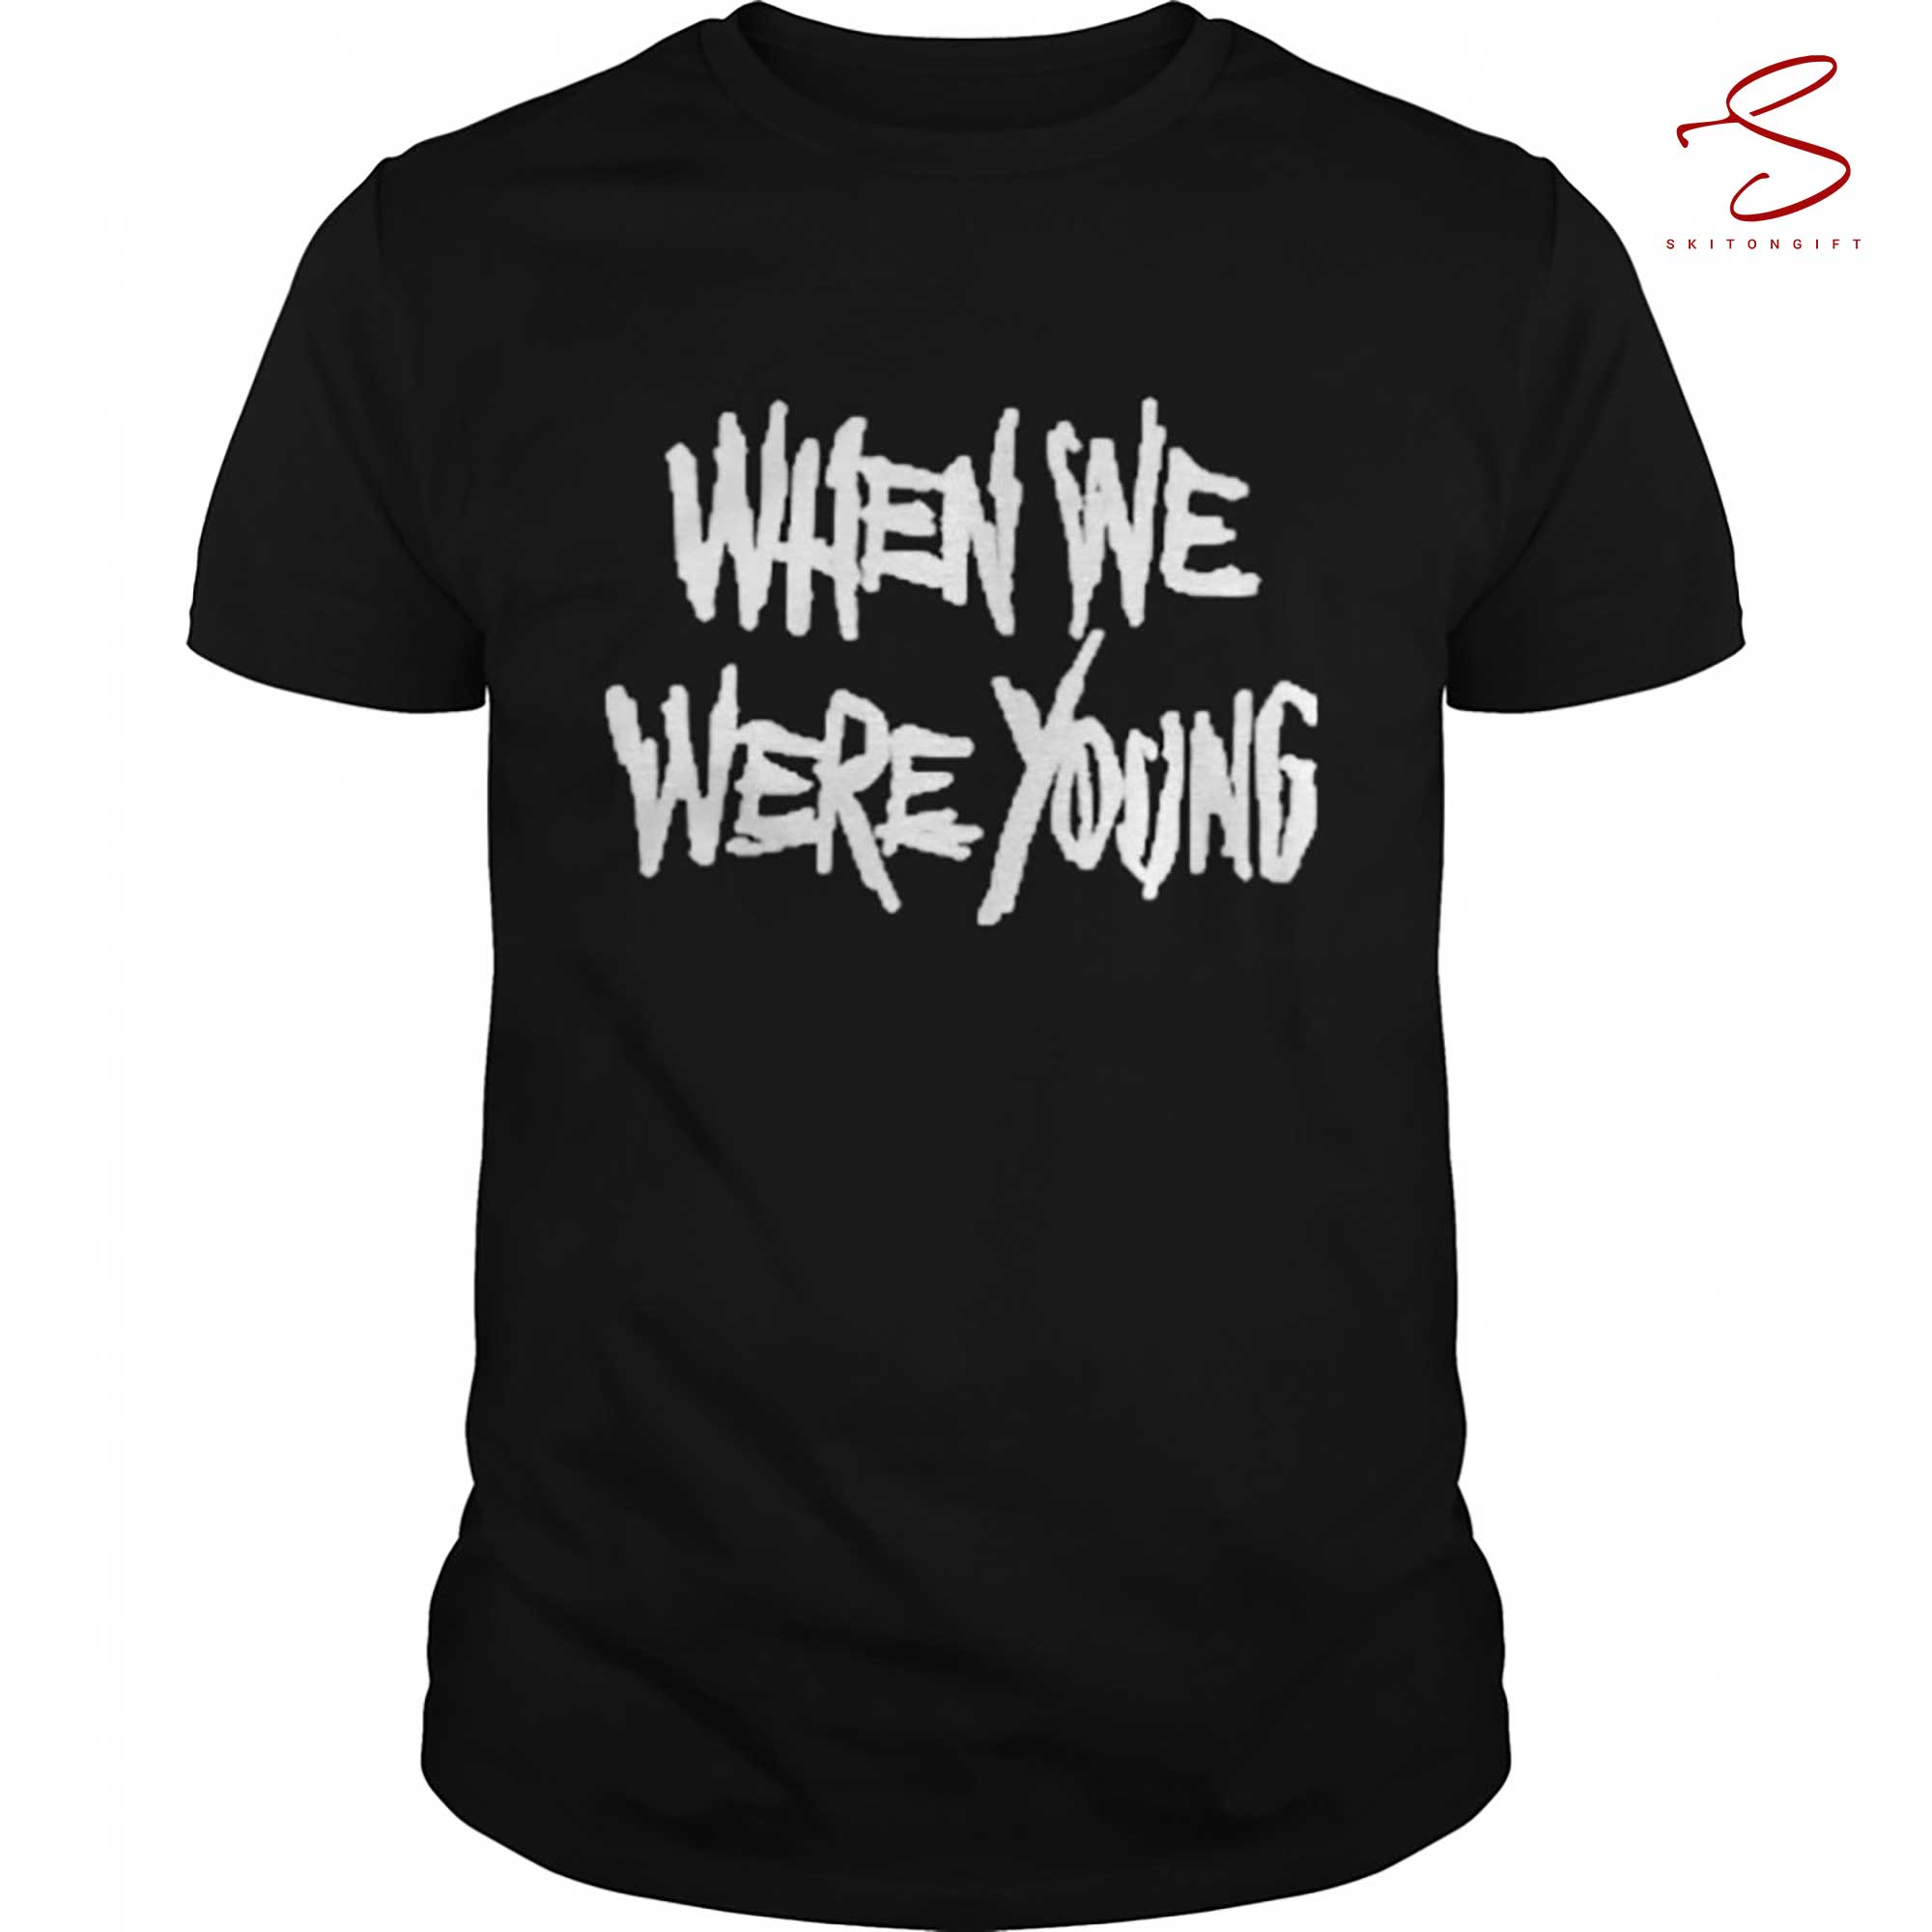 Skitongift When We Were Young T Shirt Funny Shirts Long Sleeve Tee Hoody Hoodie Heavyweight Pullover Hoodies Sweater